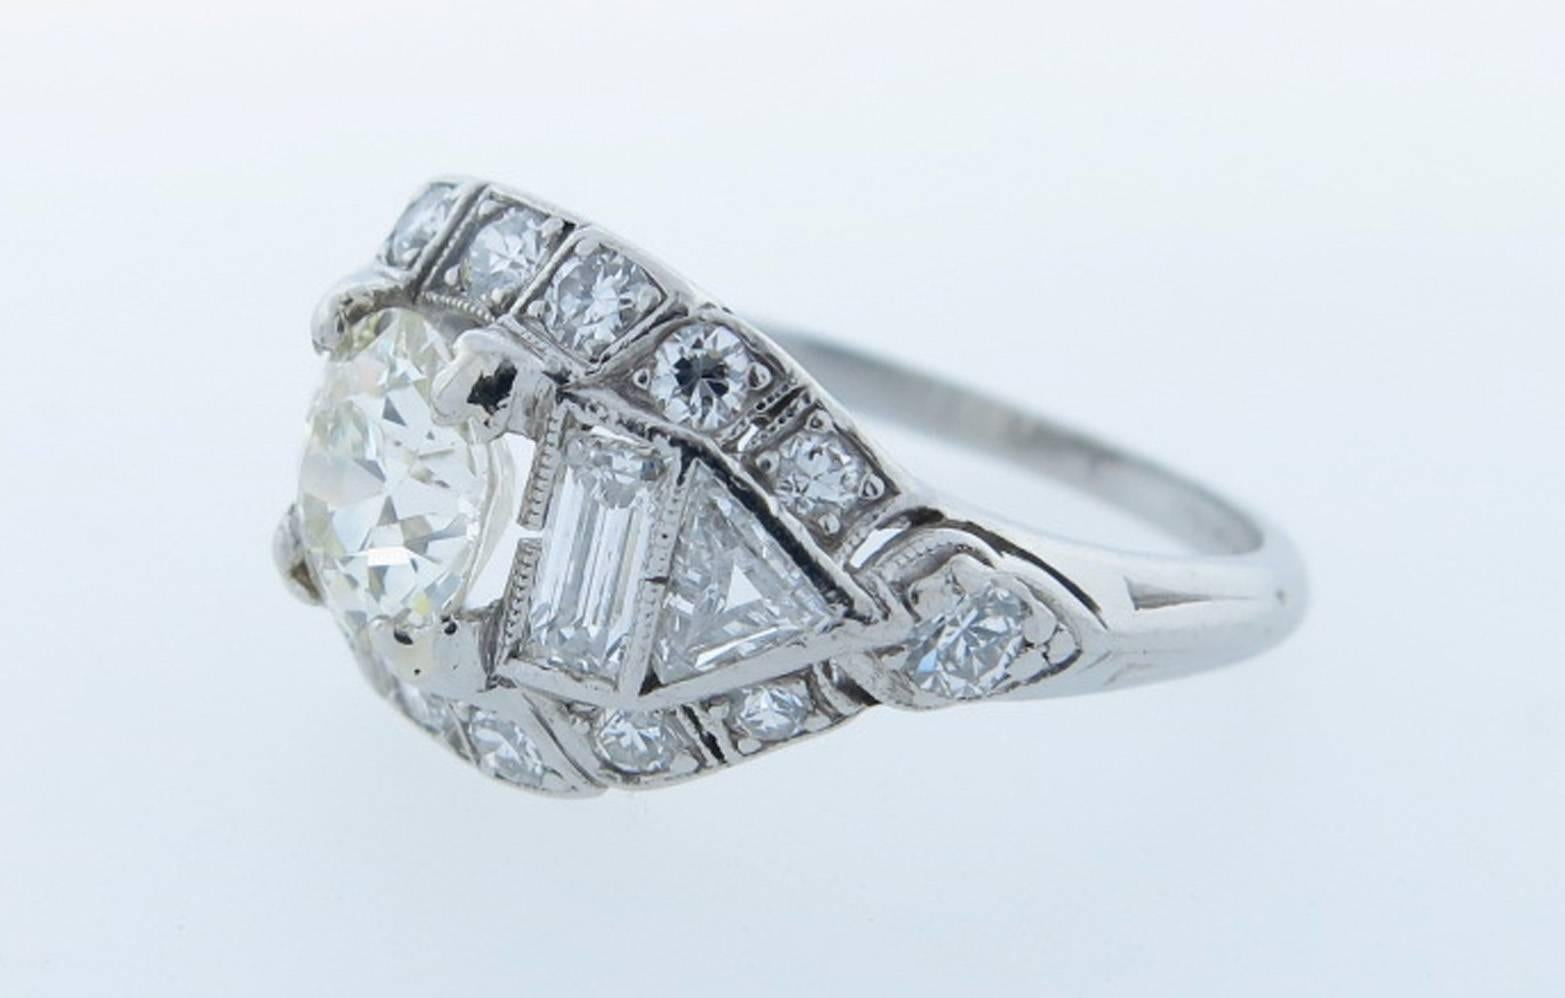 Handmade platinum mount Art Deco diamond ring with fancy cut diamond mount. The center is prong set with a round European cut diamond weighing approx .73cts. grading VS clarity J color. Each side is set with a triangular and baguette cut diamond.